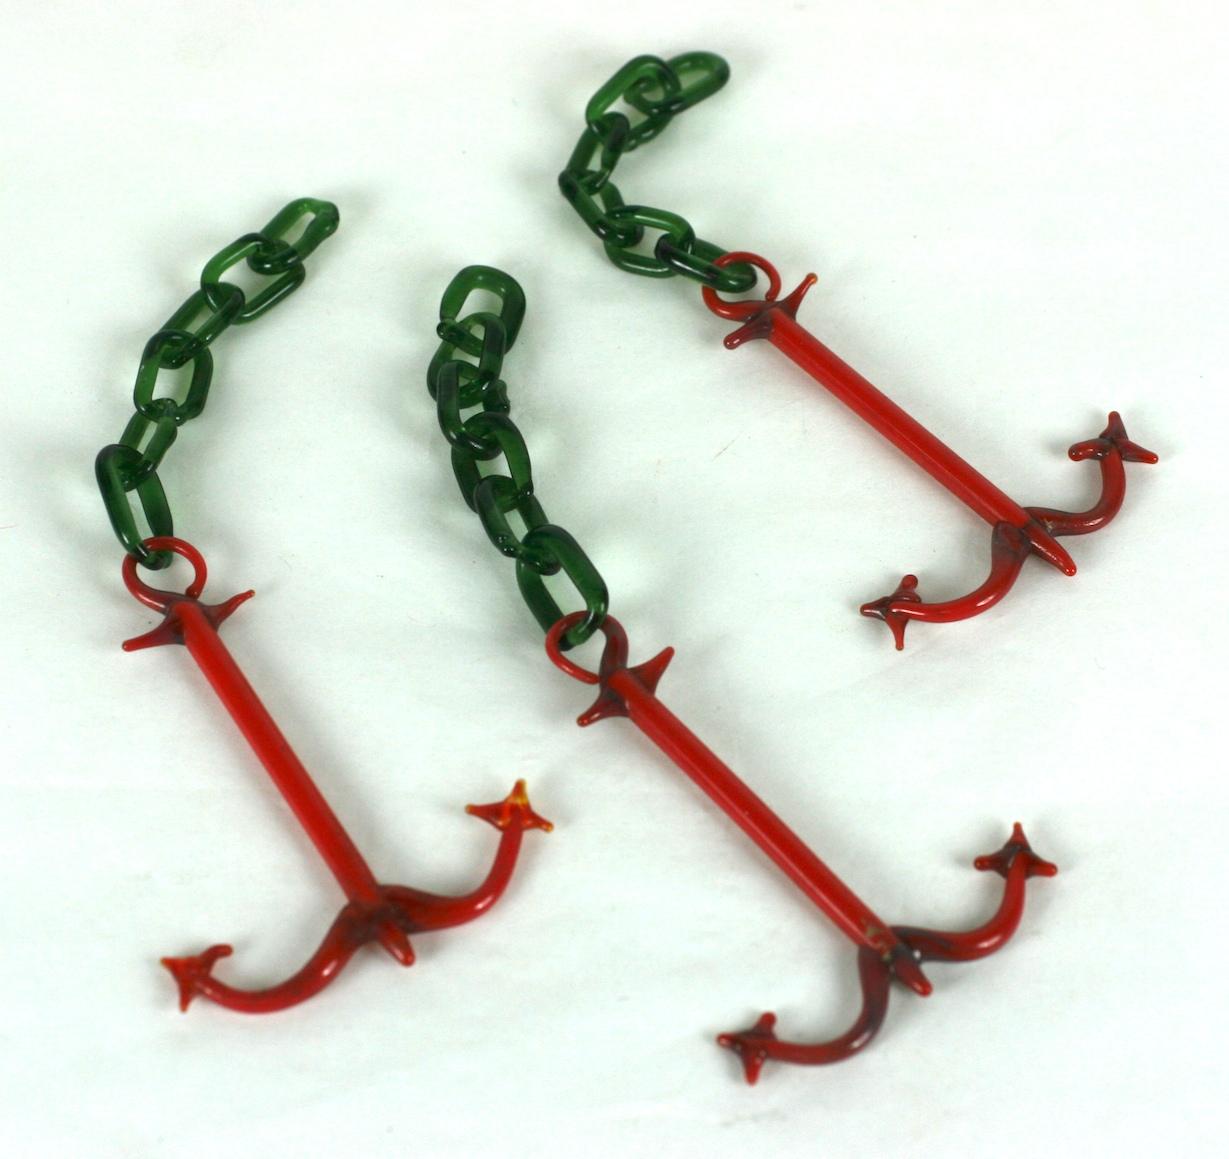 Delicate Bimini Hand blown glass anchors with chains from the 1930s Germany. Paper thin glass blown in an anchor motif with glass chain. We think these would work well in an aquarium or diorama. 
Approx 4.5